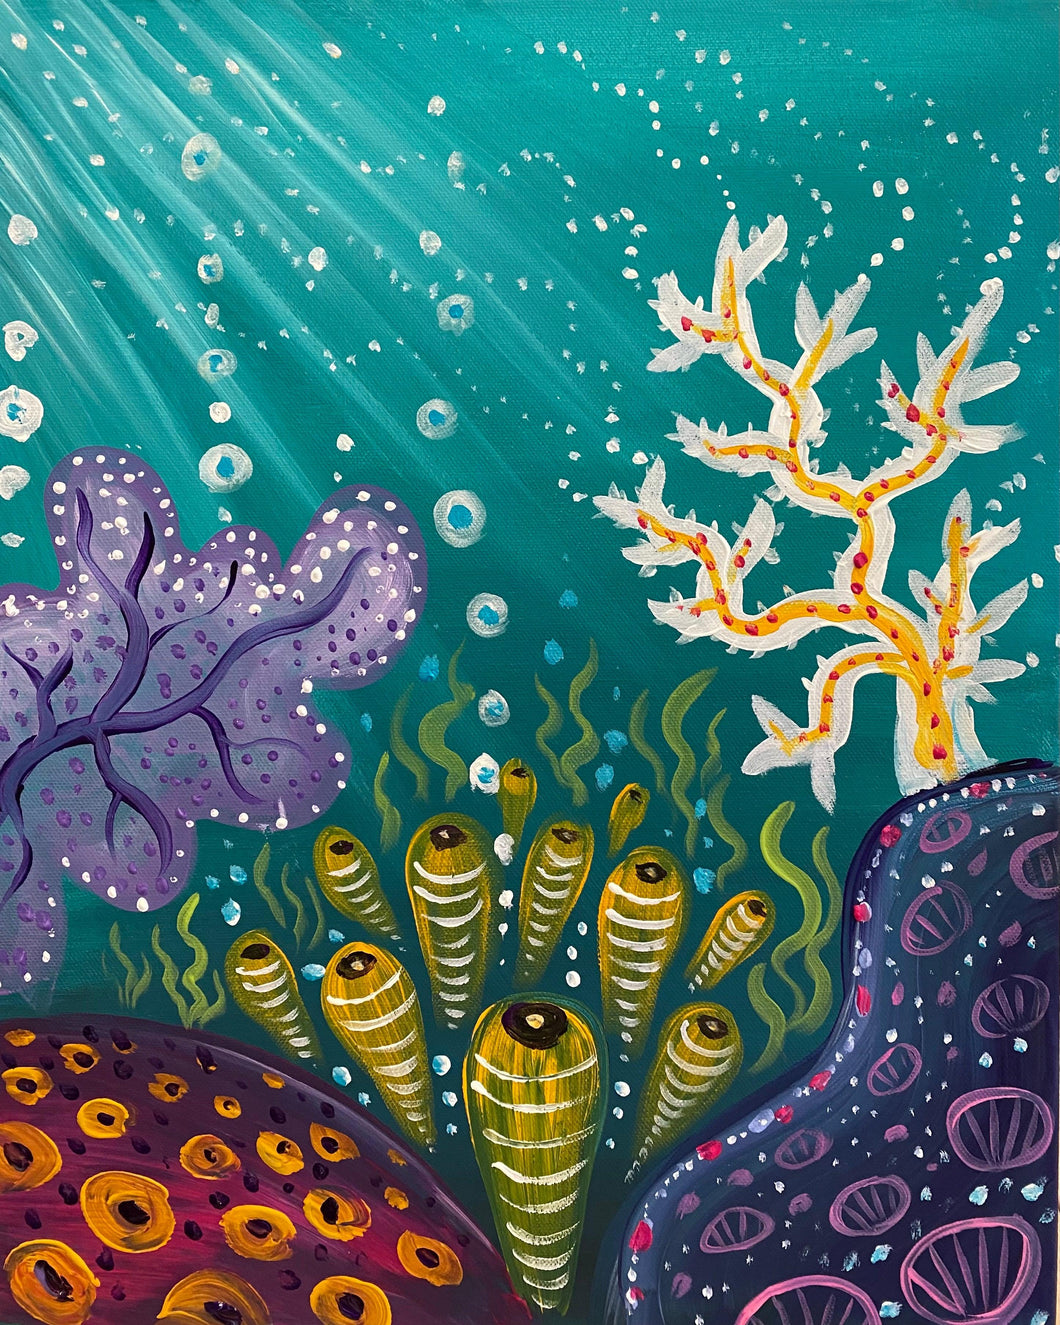 Coral Reef - FRIDAY 31st July - 3pm - UpVibes Paint & Sip Art Studio